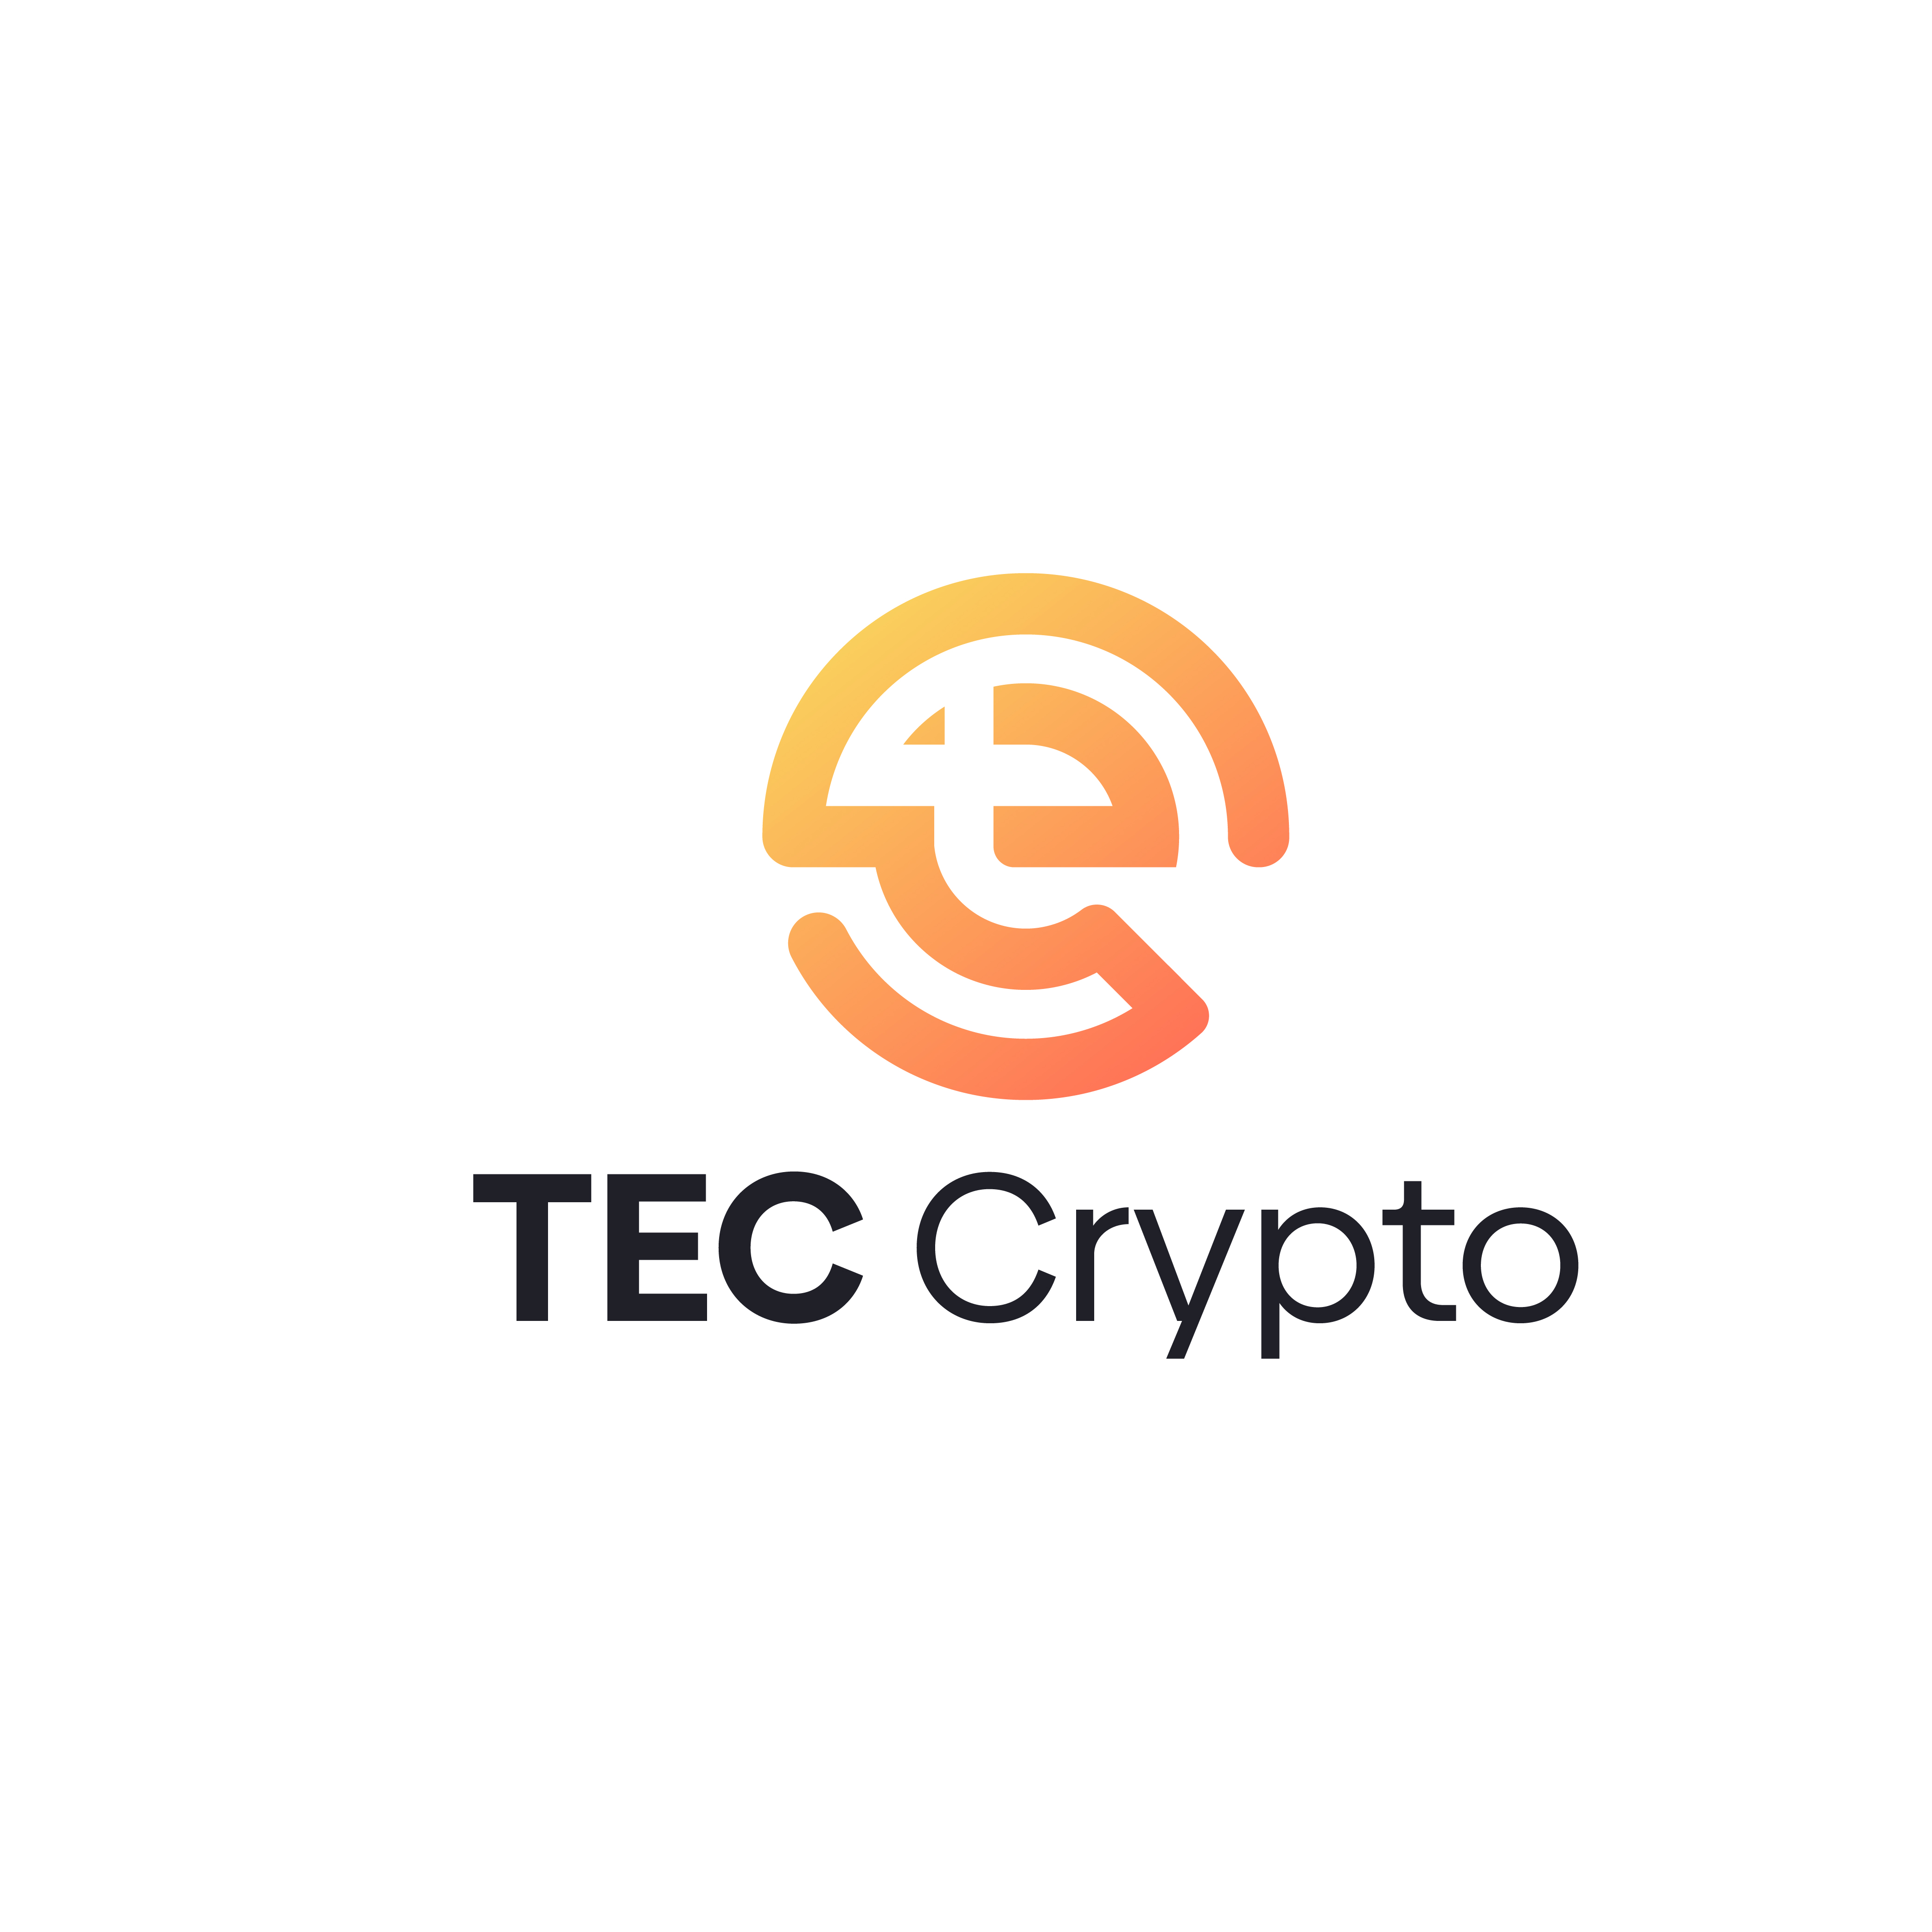 TecCrypto: Revolutionizing Home-Based Earning with State-of-the-Art Cloud Mining Solutions